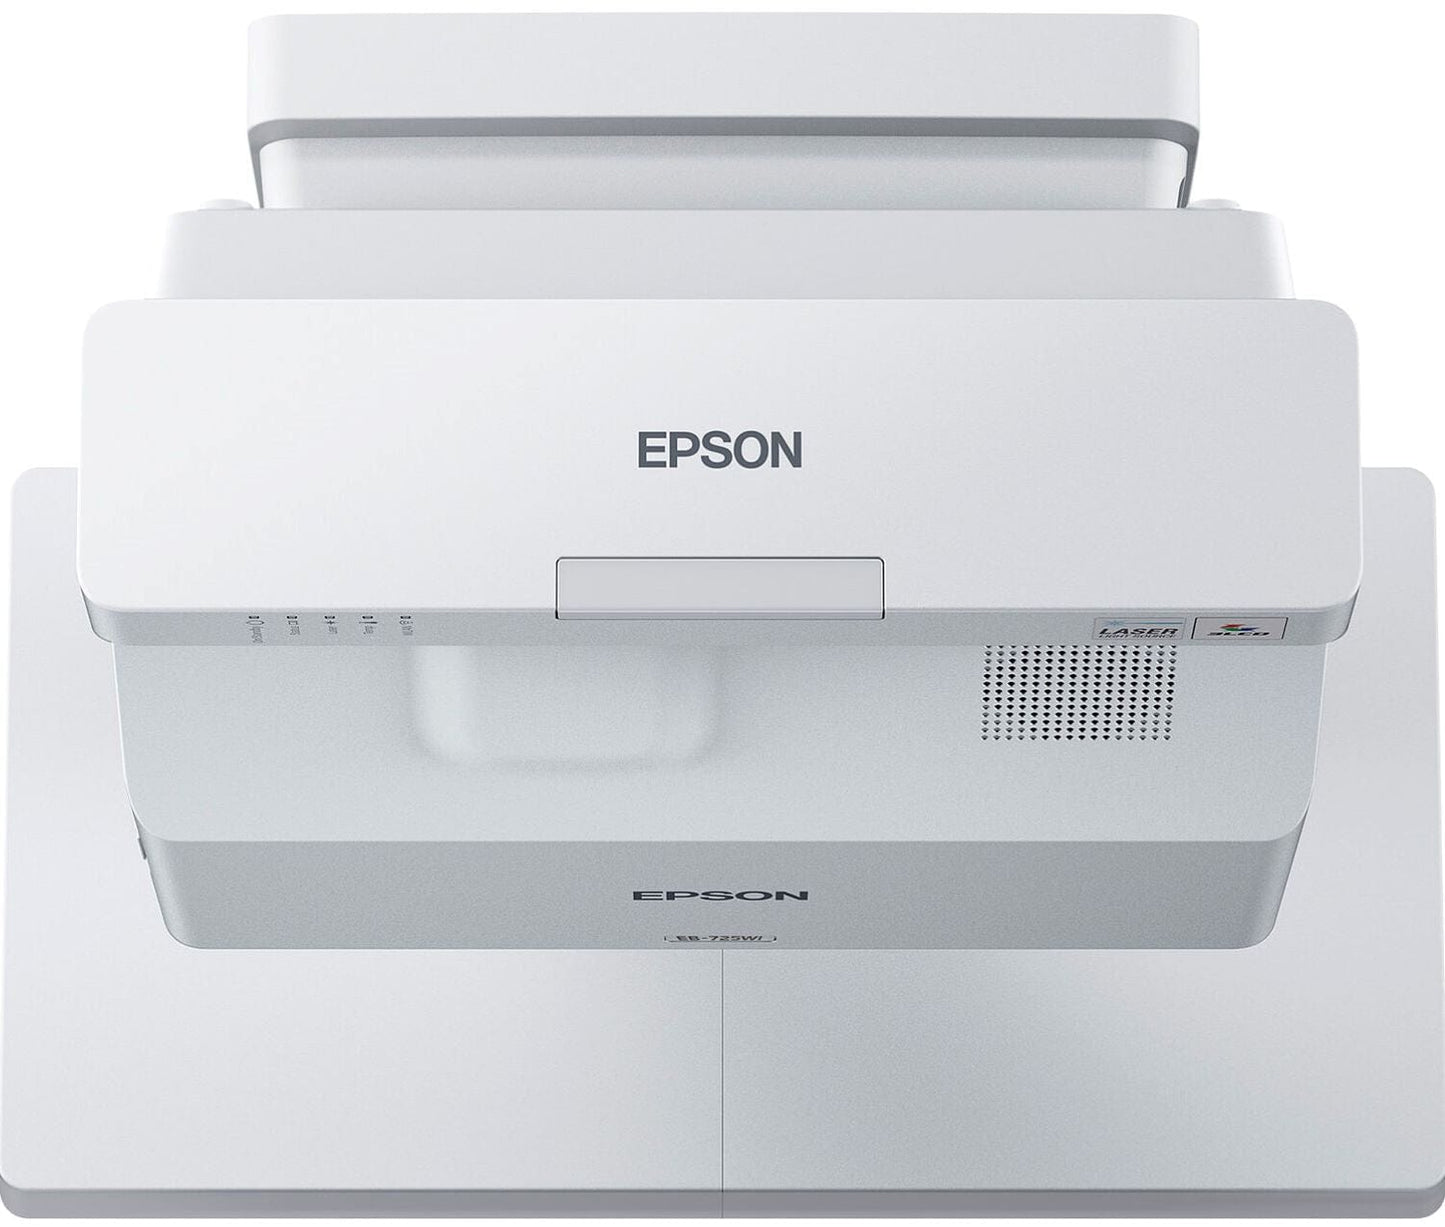 EPSON V11H998520 BrightLink 725Wi Projector with Interactive Display - PSSL ProSound and Stage Lighting